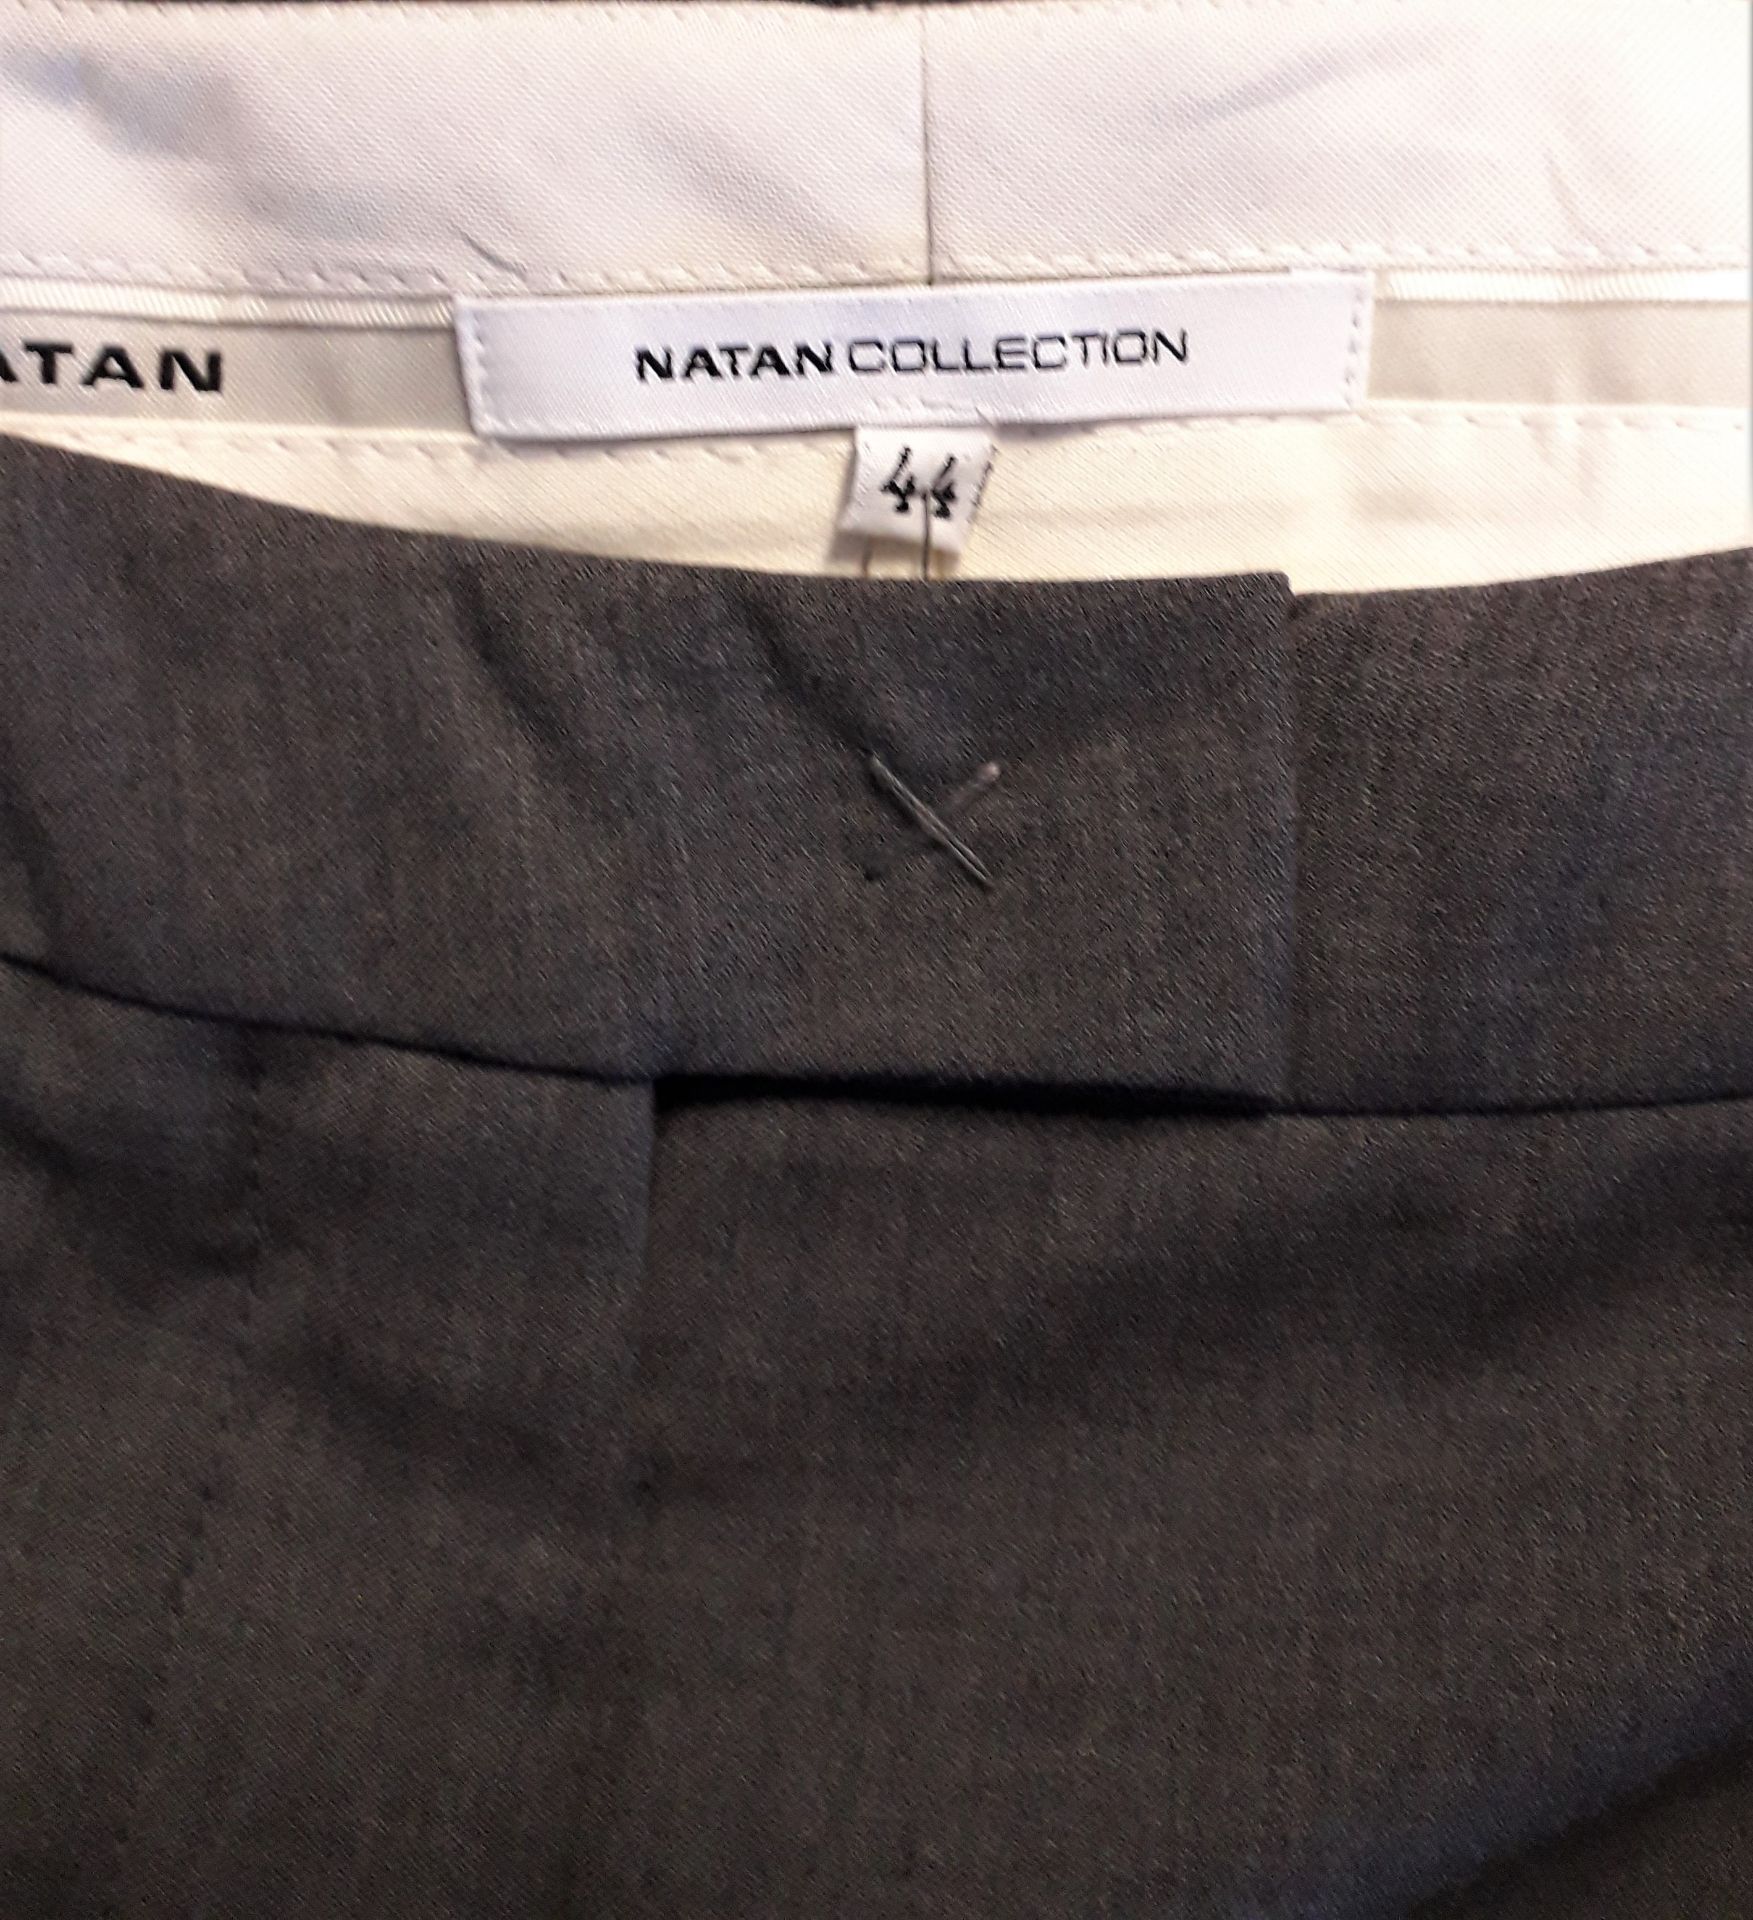 1 x Natan Collection Mid-Grey Wide Leg Tailored Trousers - Size: 44 - Material: 100% Linen - From - Image 6 of 6